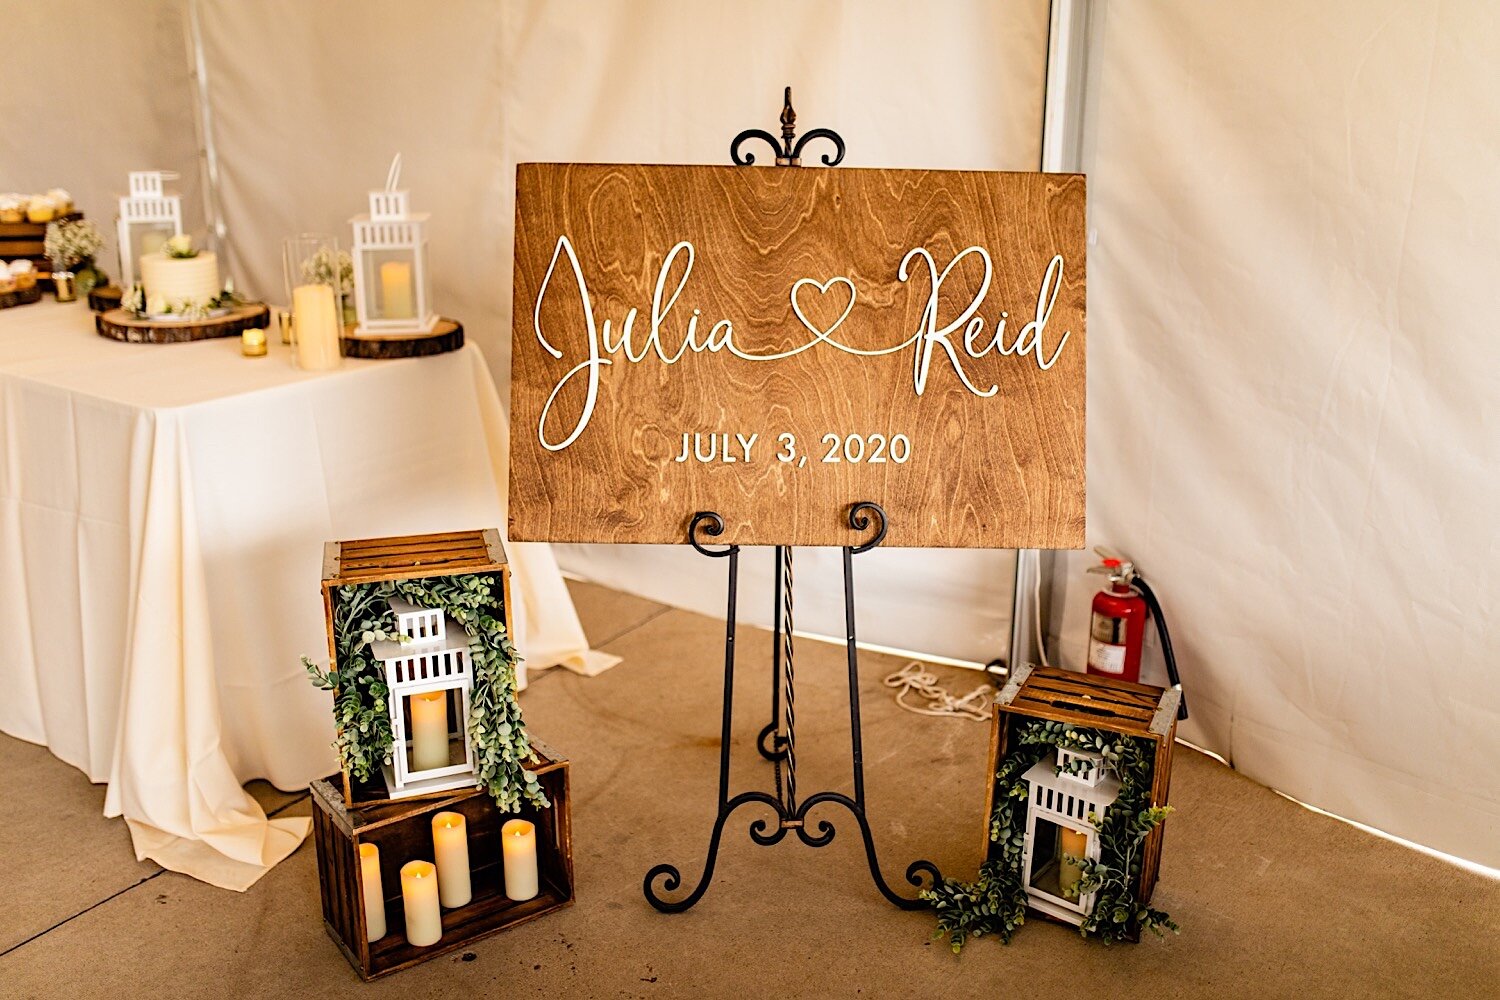  Wedding welcome sign, wedding sign, calligraphy sign, Catholic Colorado Wedding Ceremony at Saint Francis of Assisi and Reception at Arrowhead Golf Club, Colorado Wedding Planner, Colorado Wedding Planning, Colorado Wedding, Denver Wedding, Wedding 